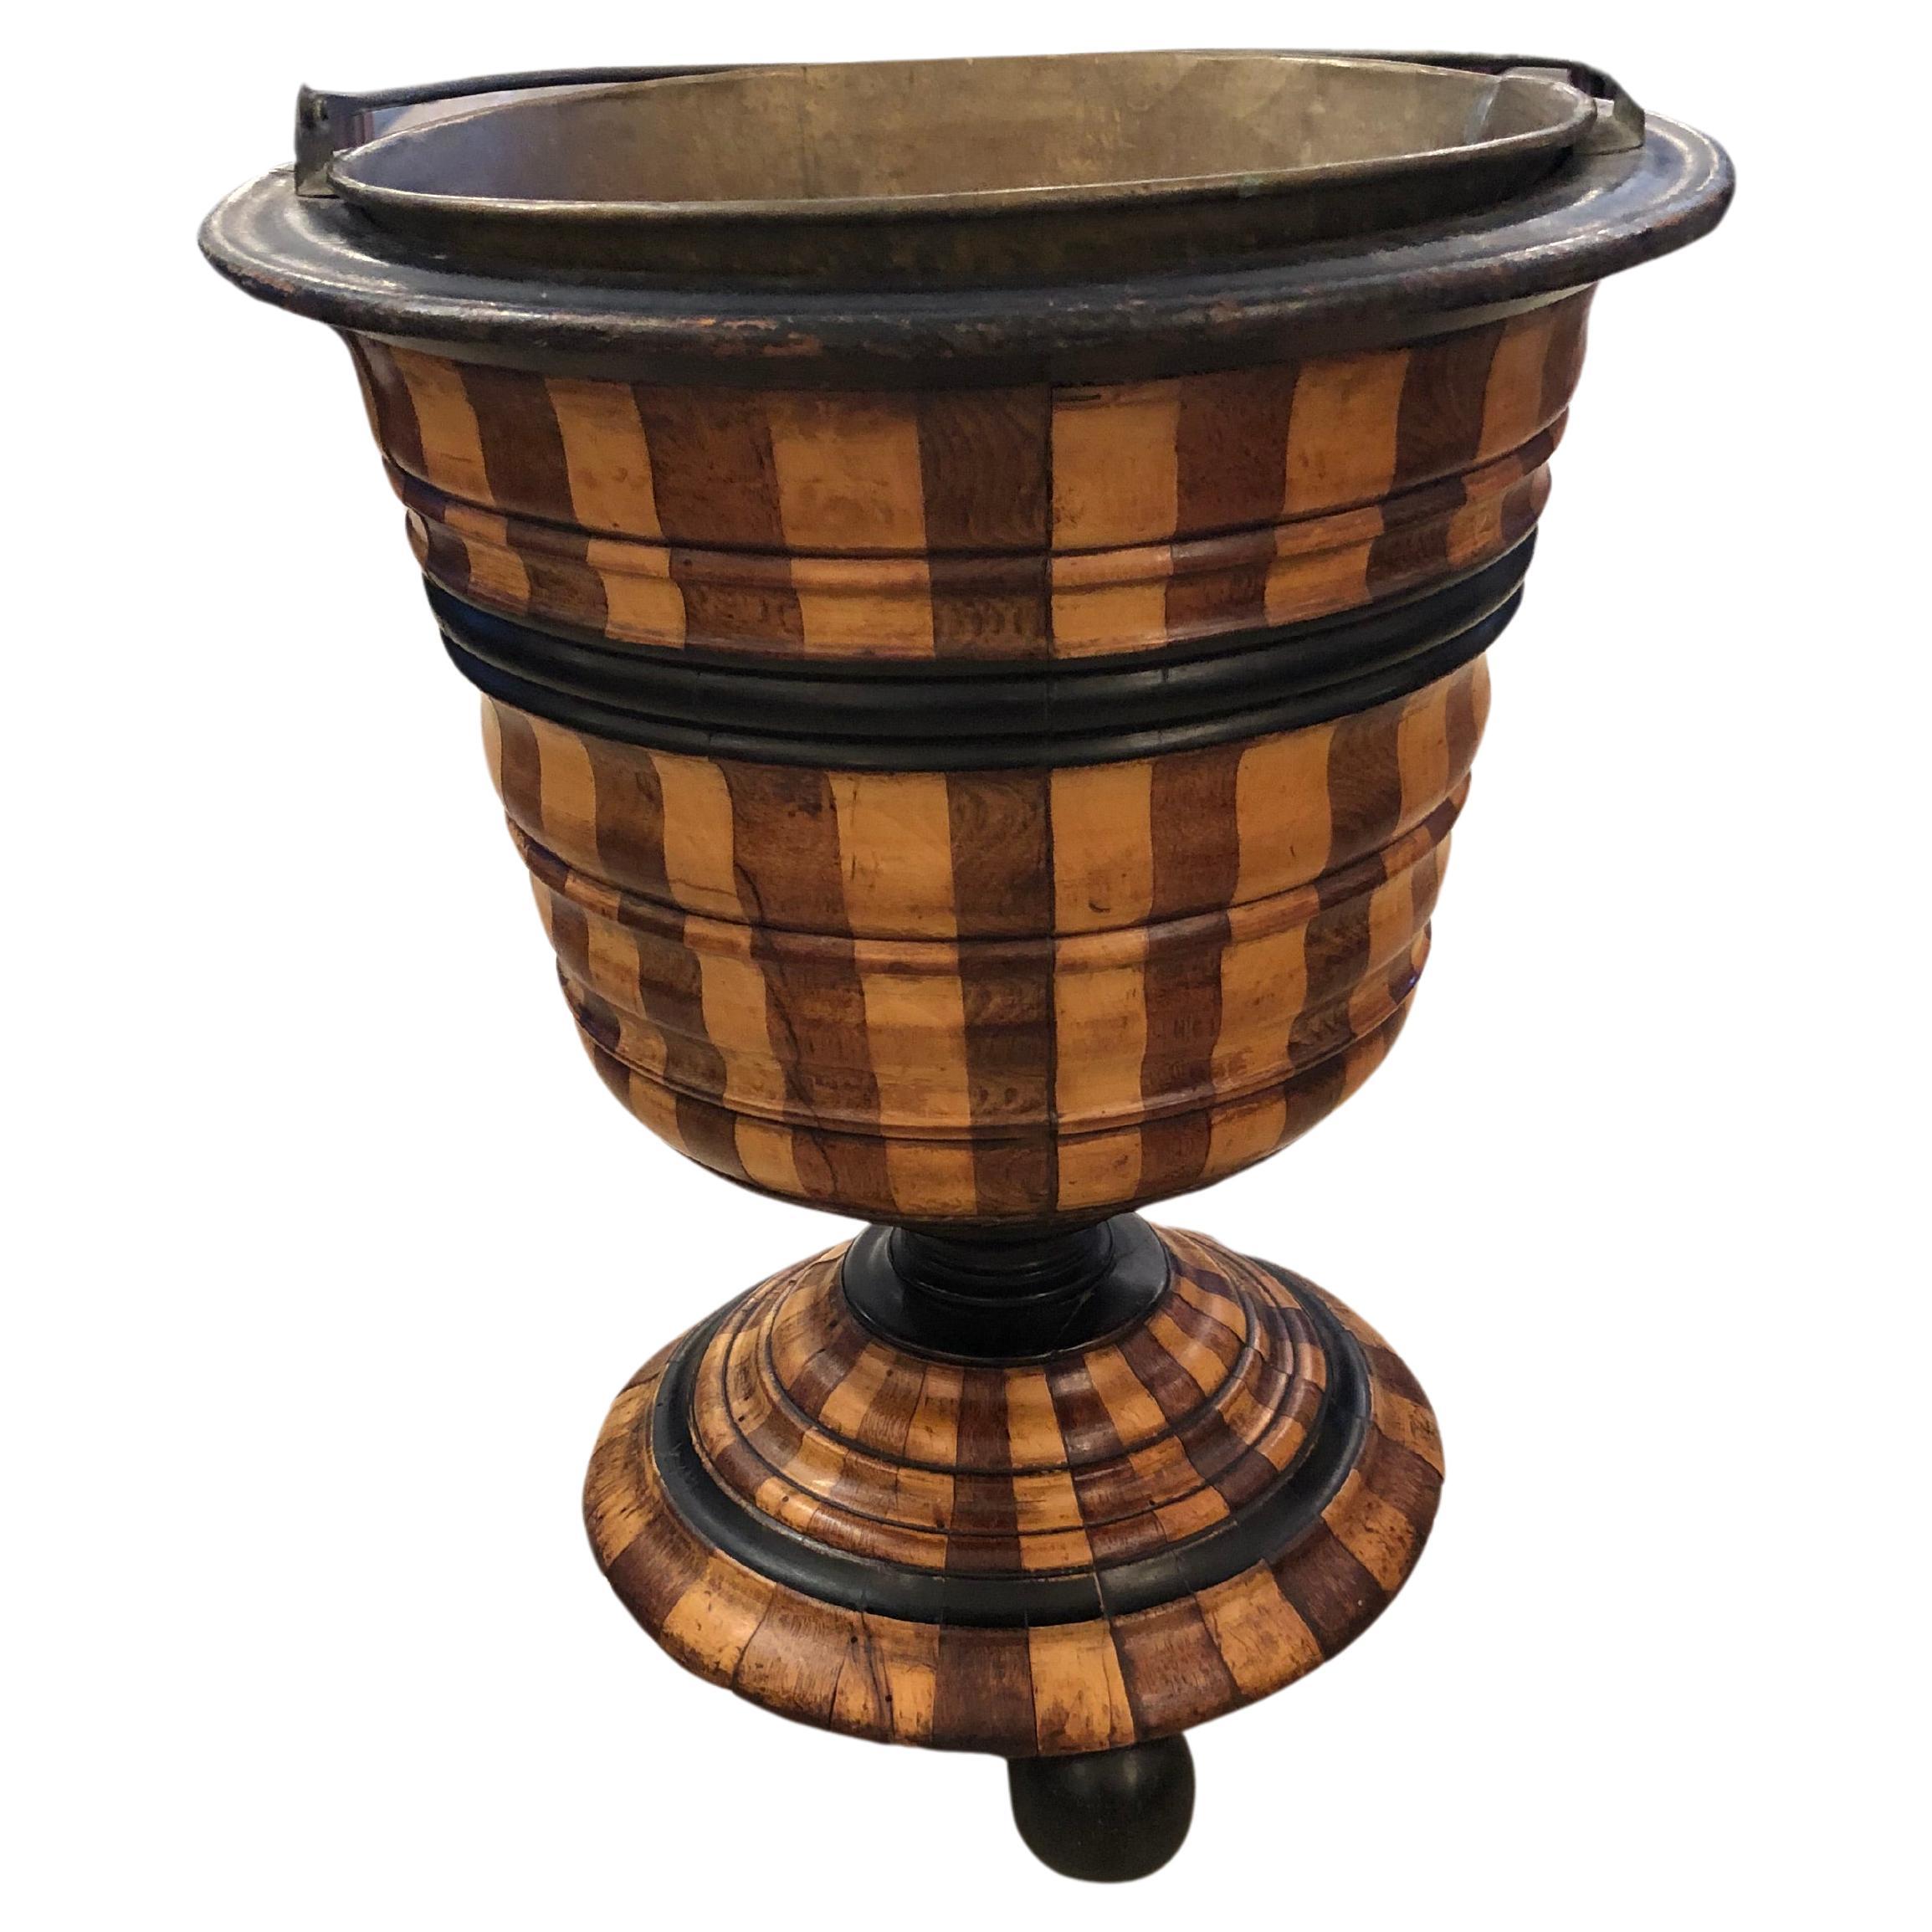 Handsome mixed wood urn shaped planter having dark and light striped pattern and ball feet.  There's a copper pail liner.  A metal handle makes the whole planter 23